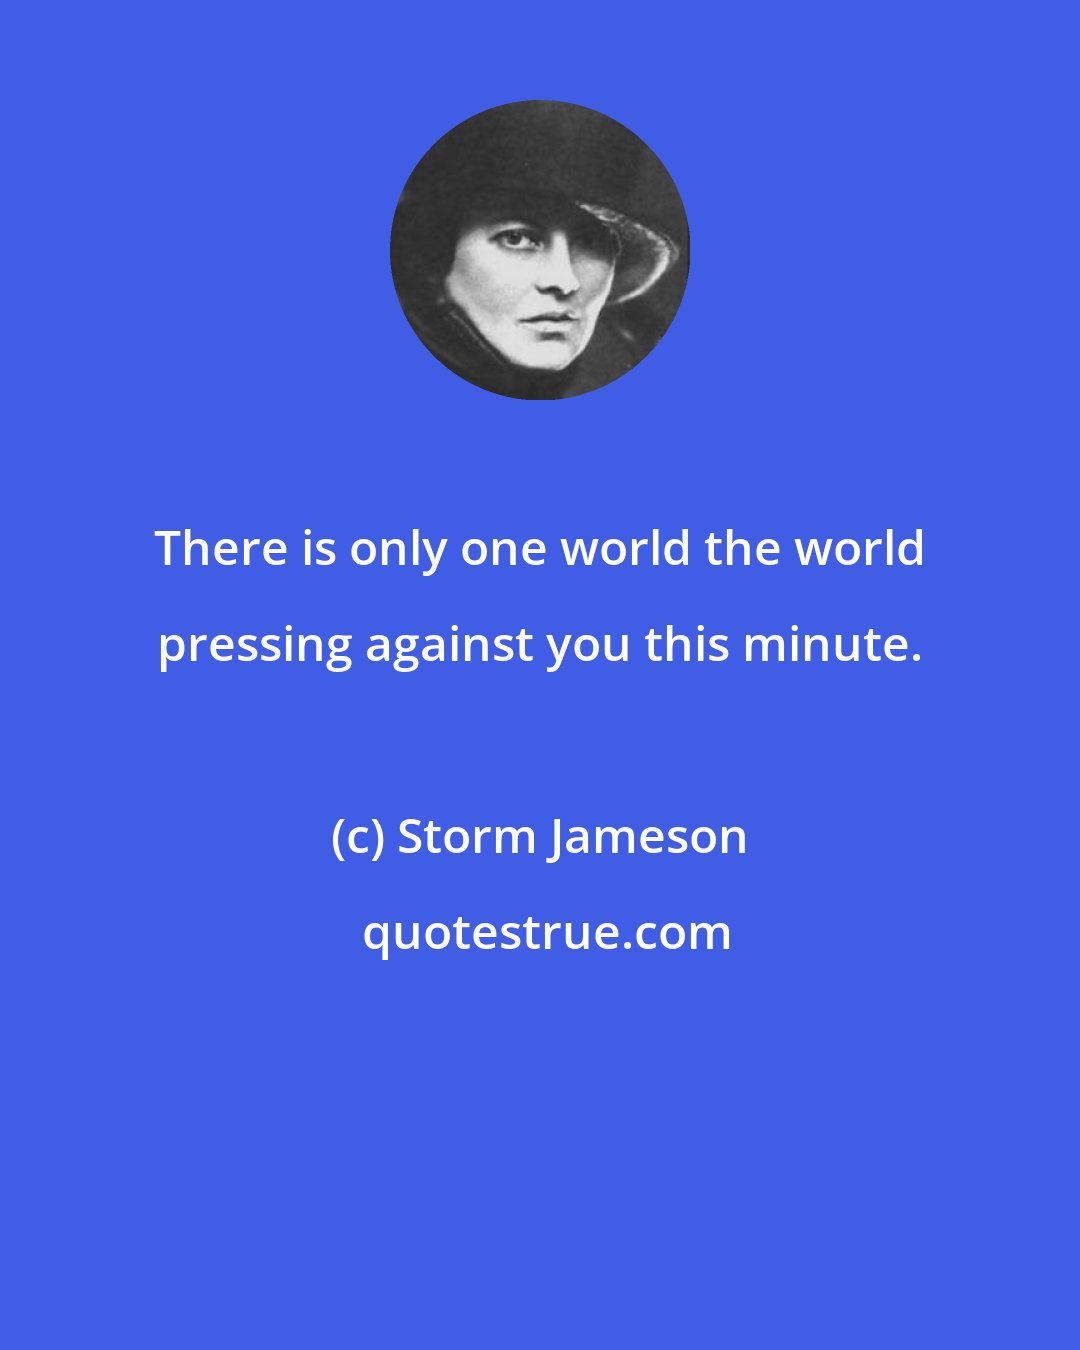 Storm Jameson: There is only one world the world pressing against you this minute.